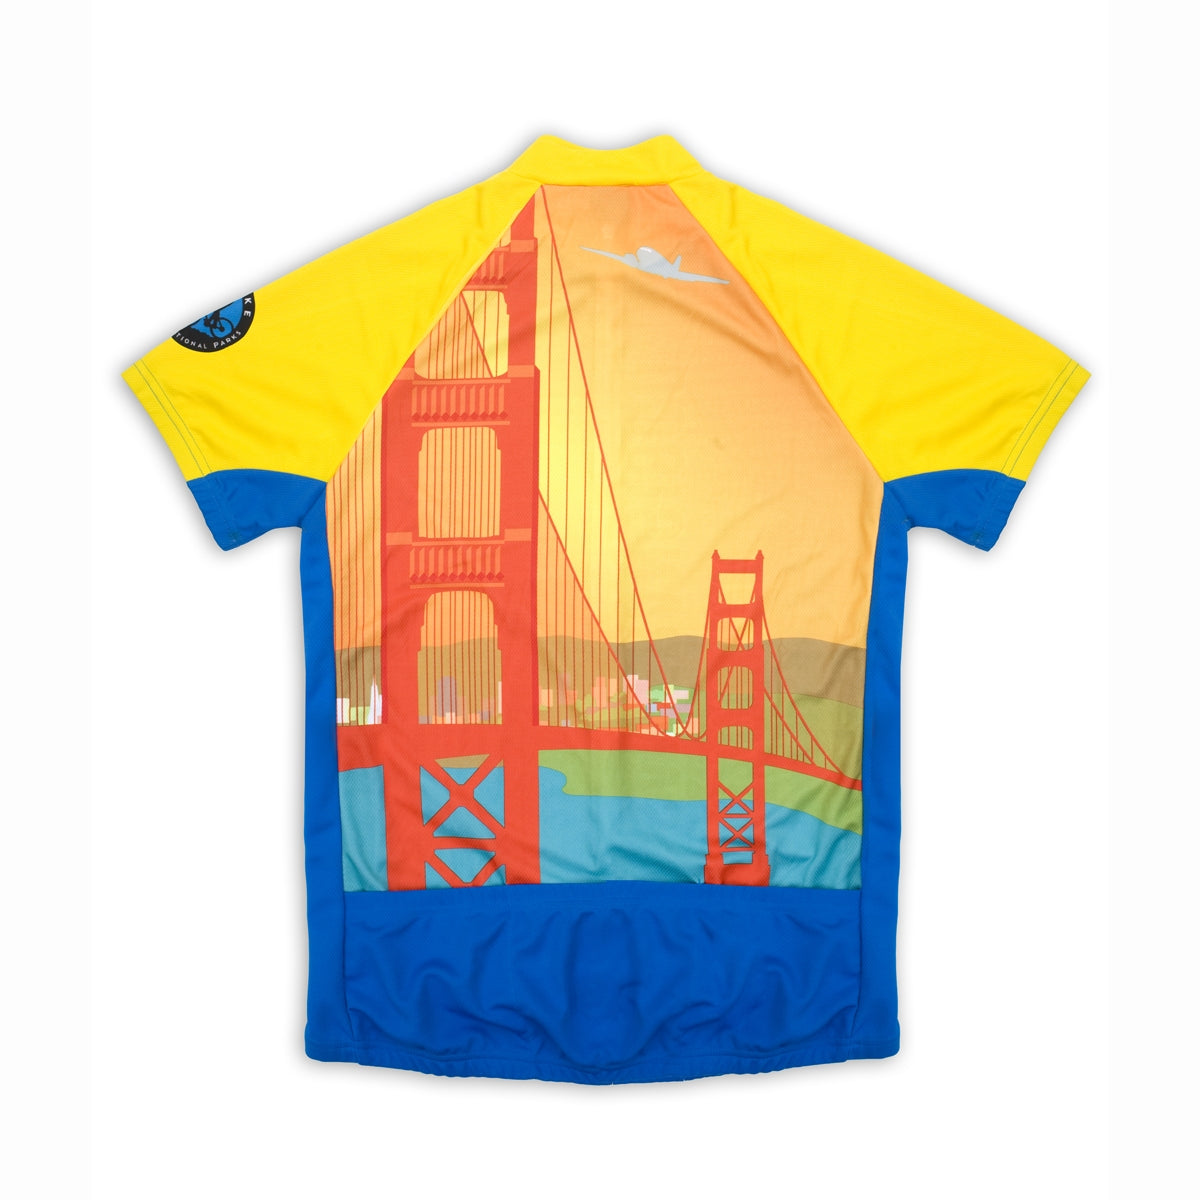 Colorful short-sleeved bike shirt with stylized designs of the Golden Gate Bridge and San Francisco on torso.